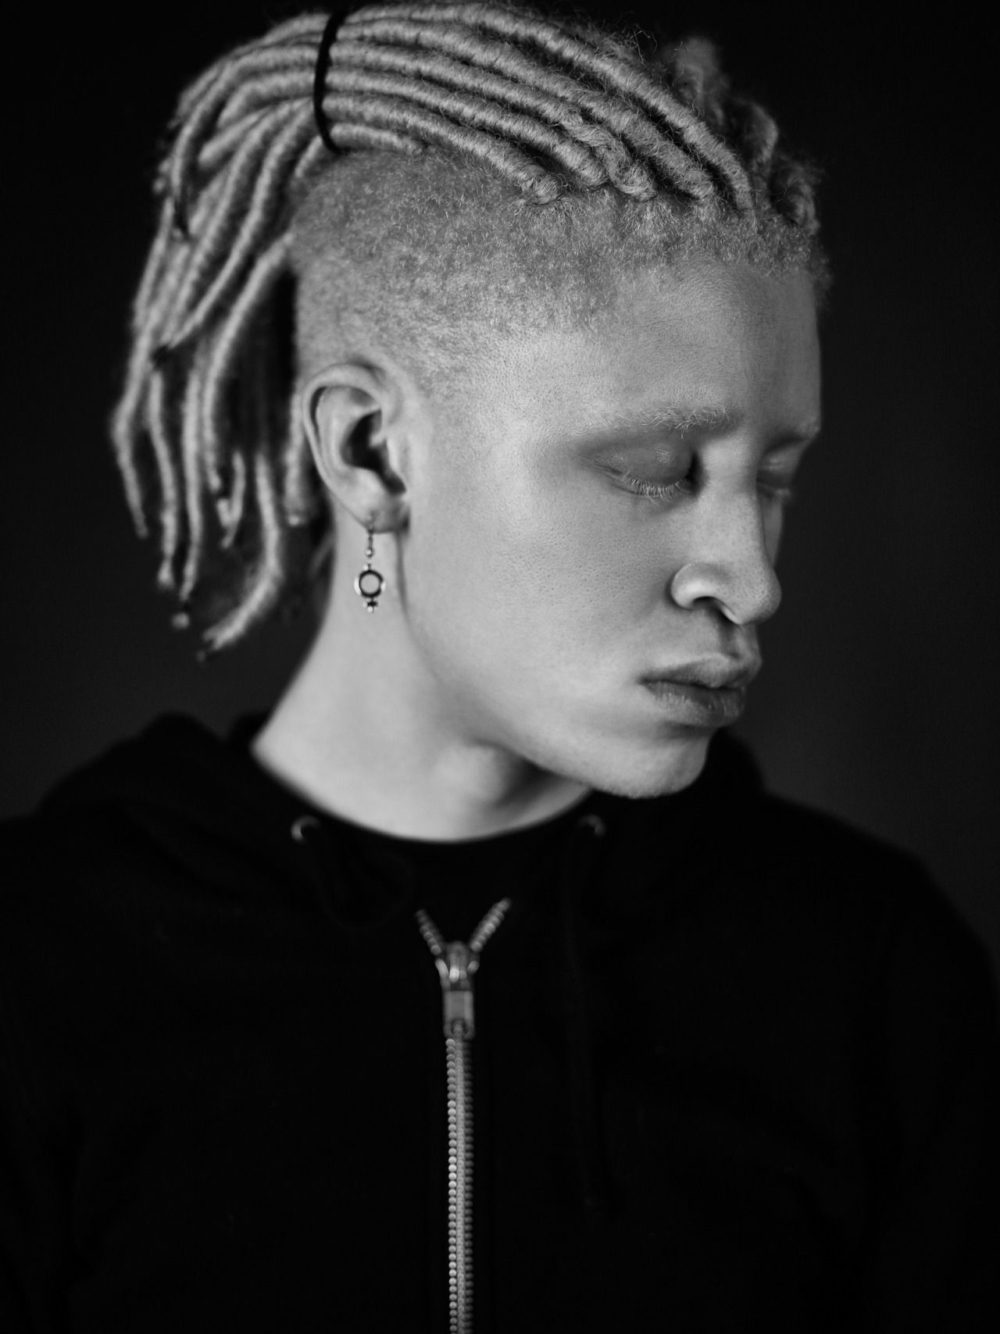 Shaun Ross is pushing for change within the male modelling industry